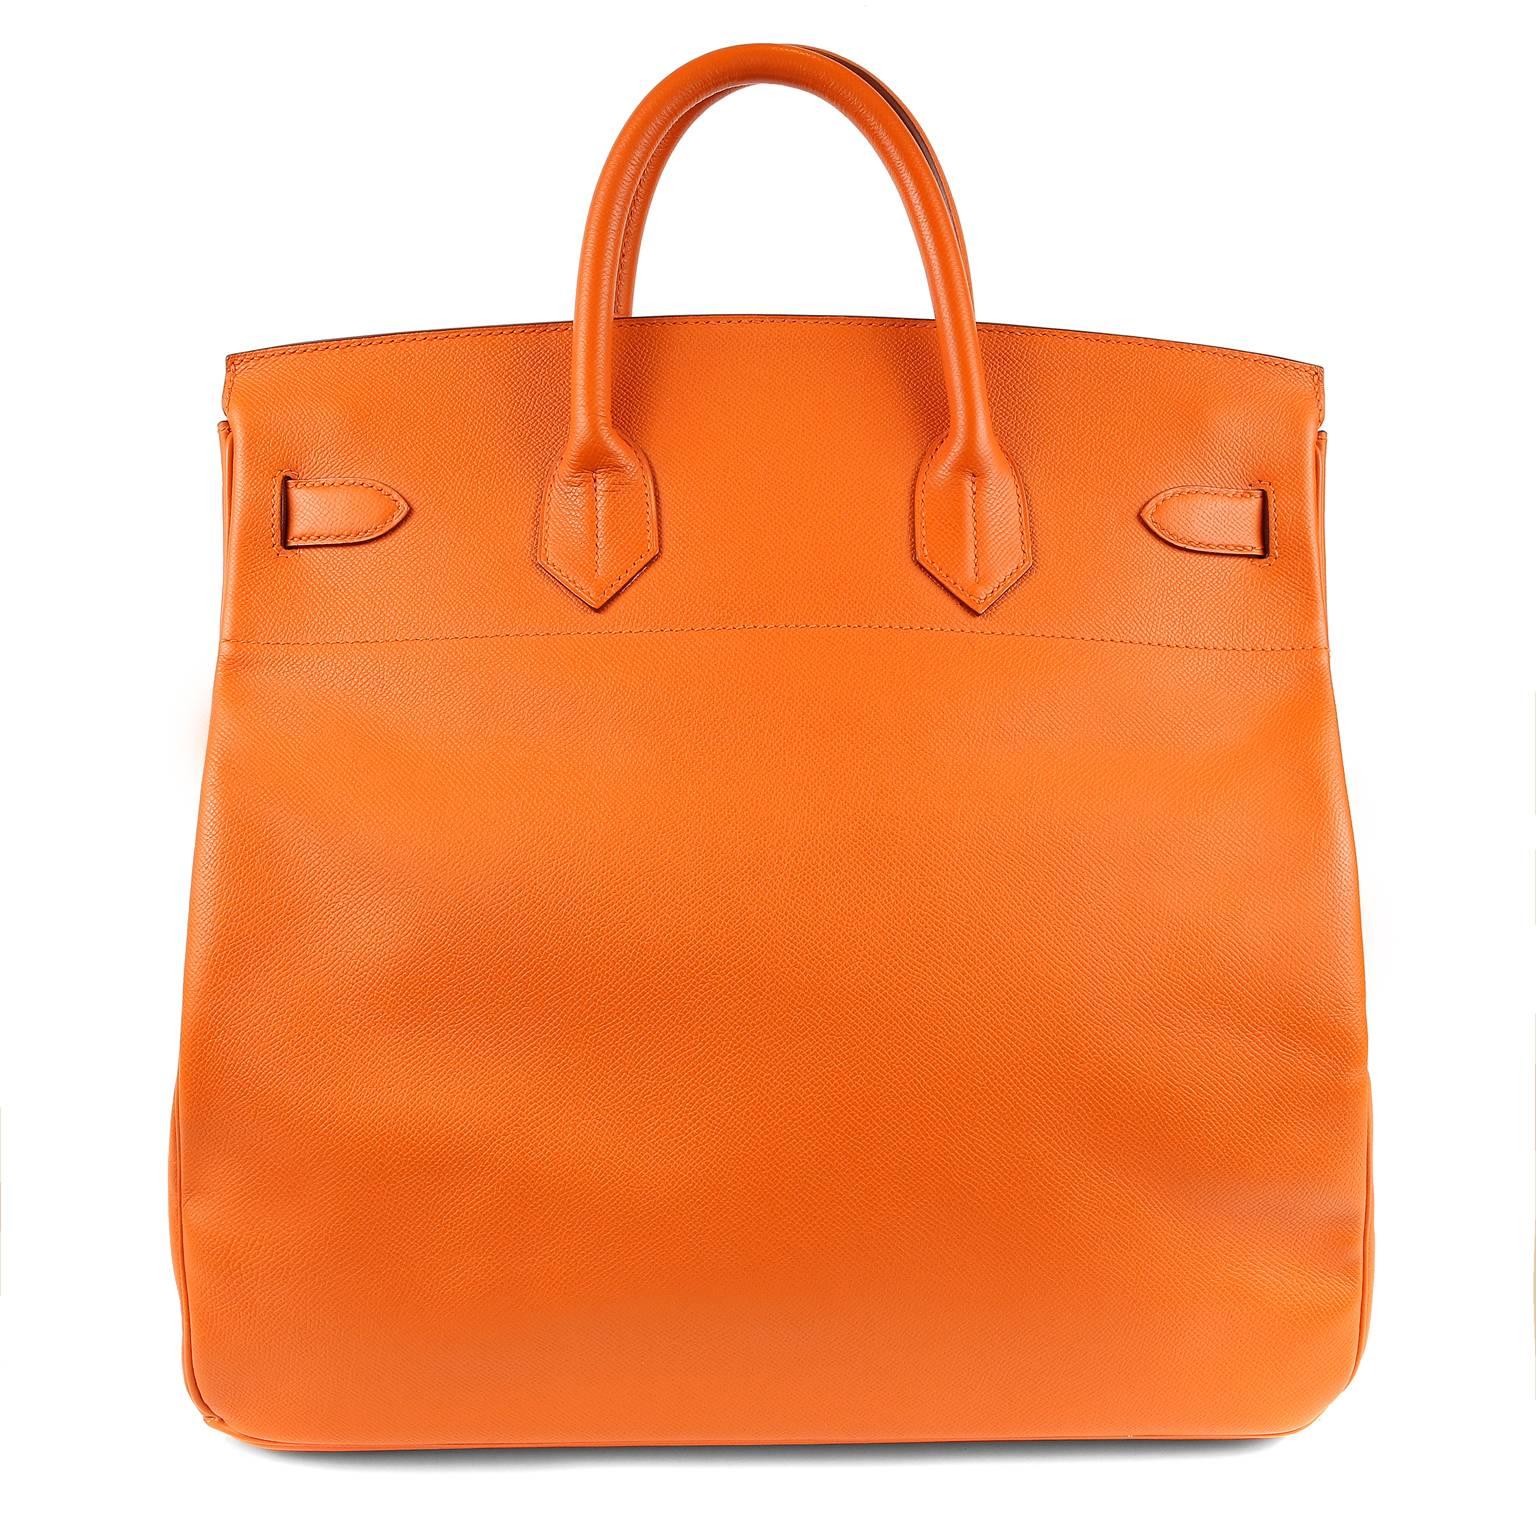 Hermès Orange Epsom Leather 40 cm HAC- Pristine Condition
 Considered the ultimate luxury item the world over and hand stitched by skilled craftsmen, wait lists of a year or more are commonplace for Hermès bags.

The HAC, or “high belts” bag, is